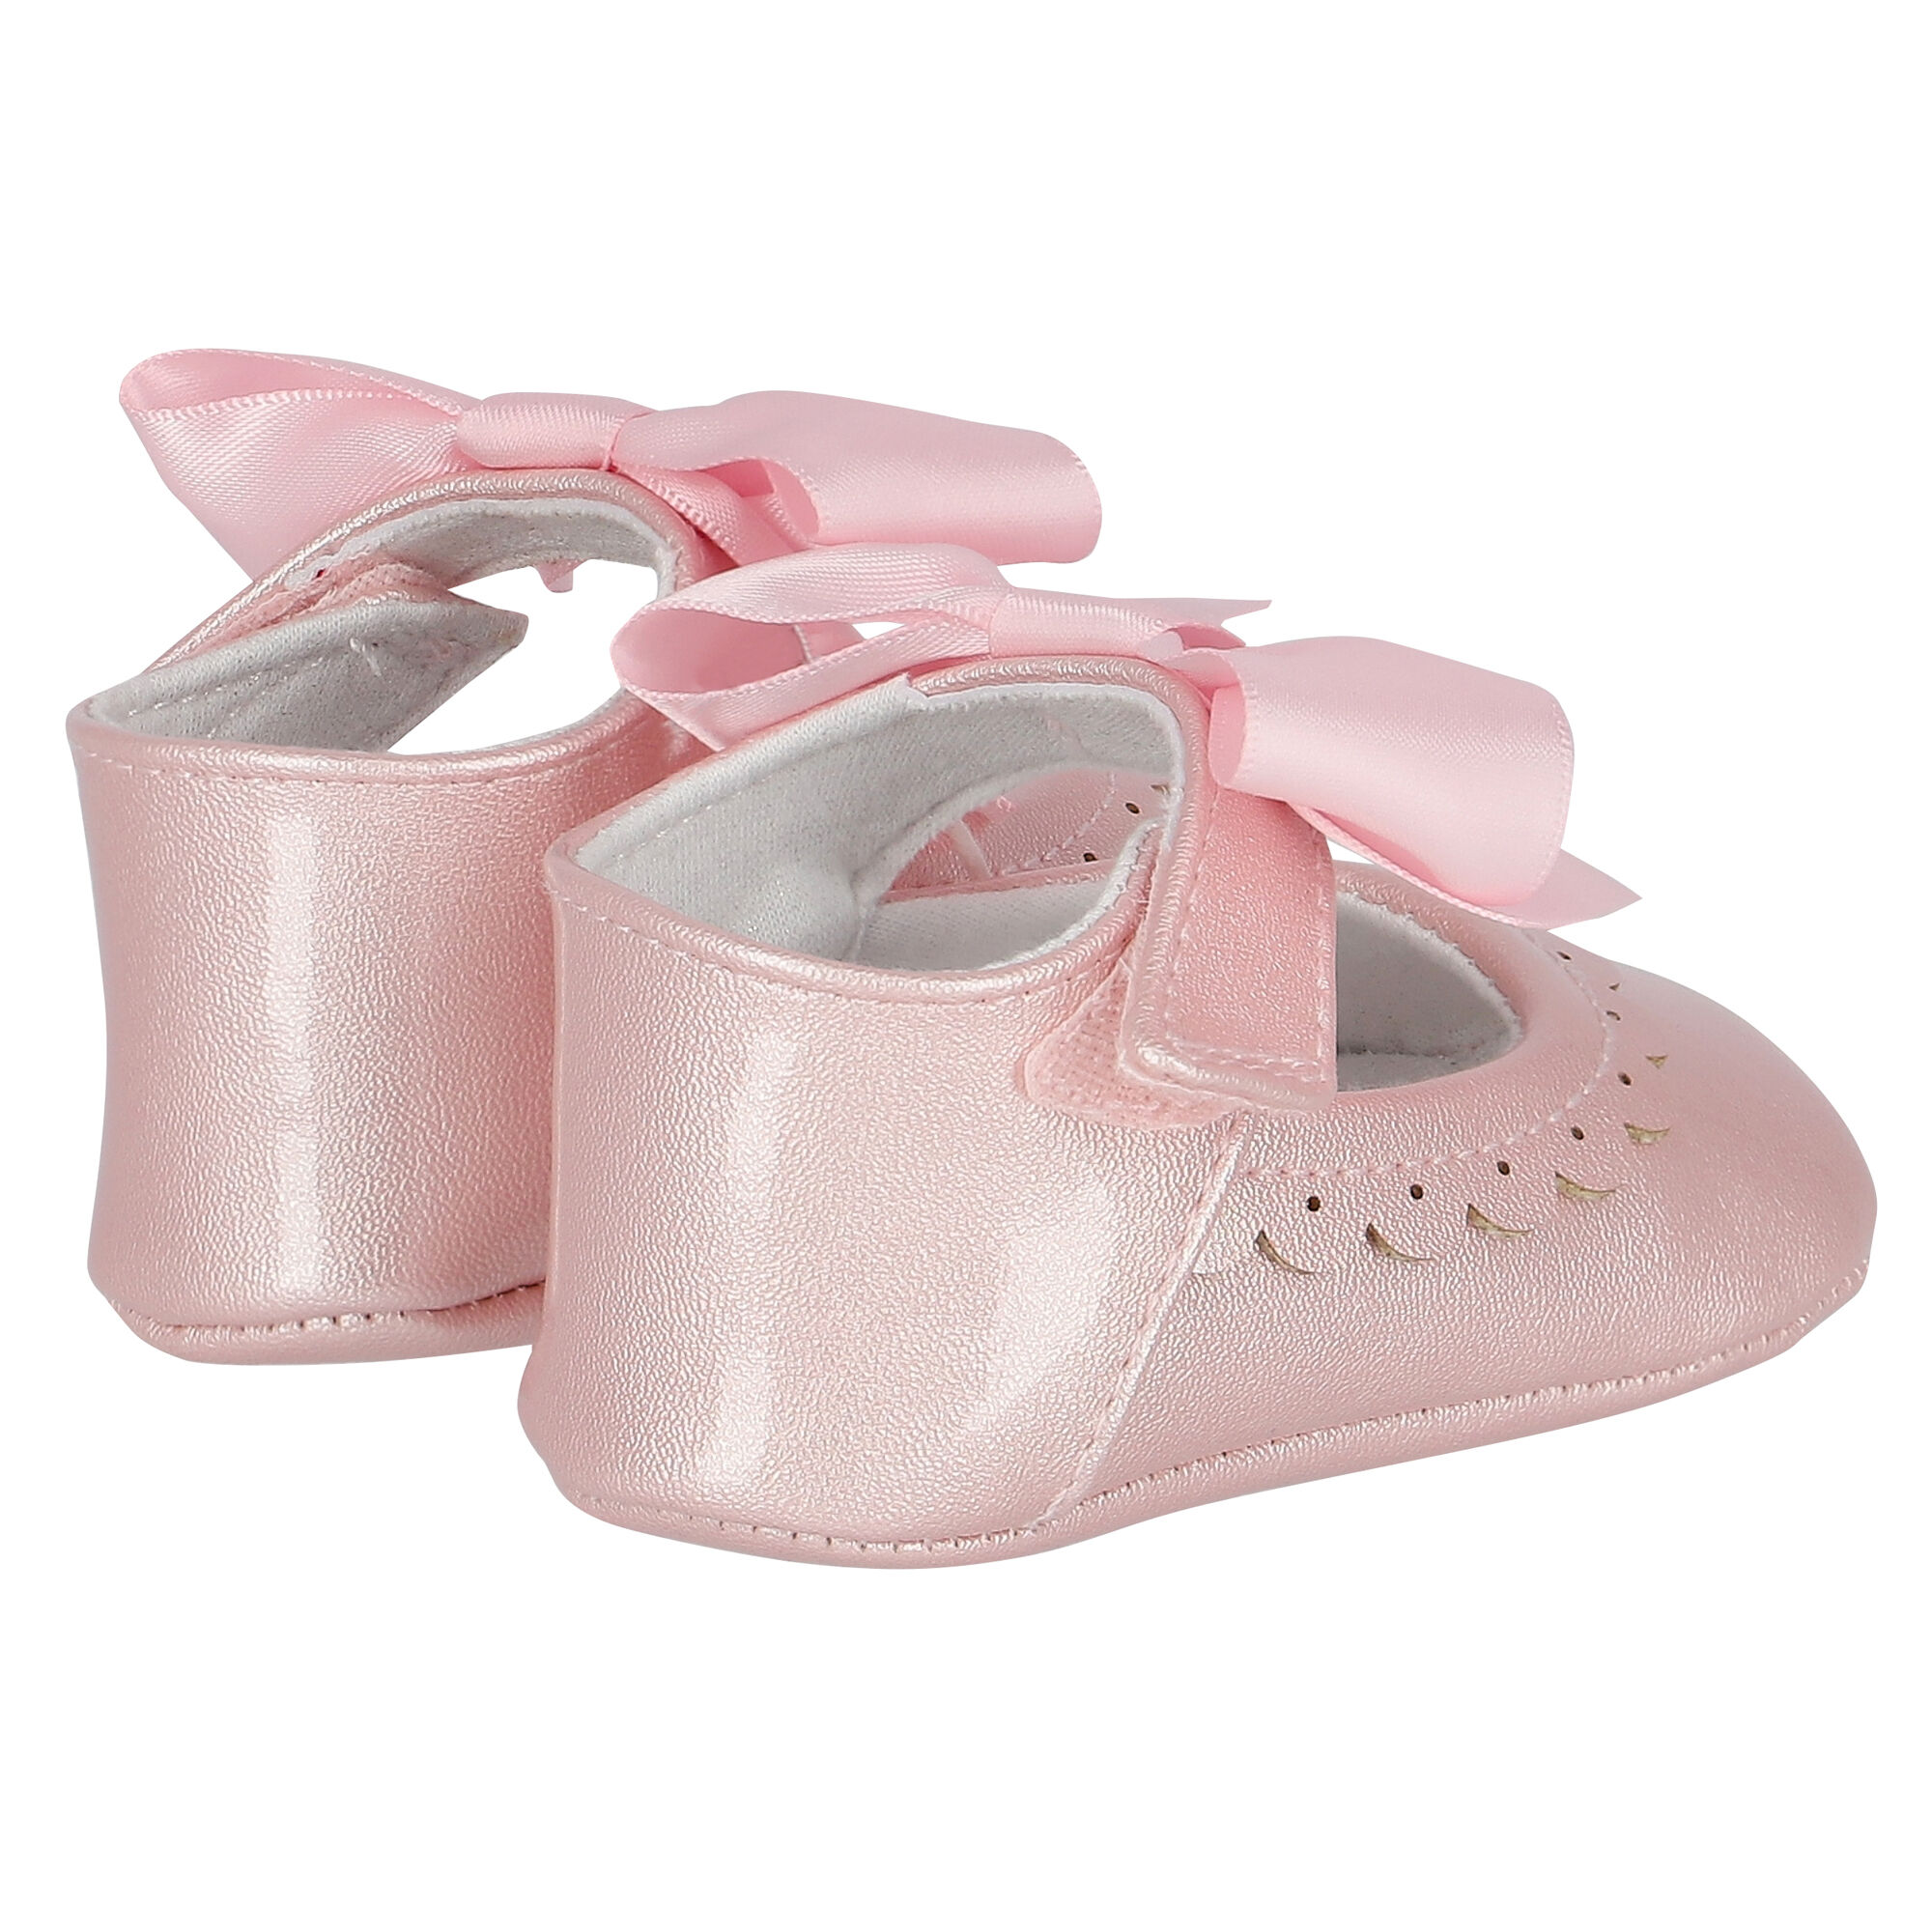 0-3 months shaped ballerinas "light grey and mustard yellow bow" Shoes Girls Shoes Slippers Baby booties 